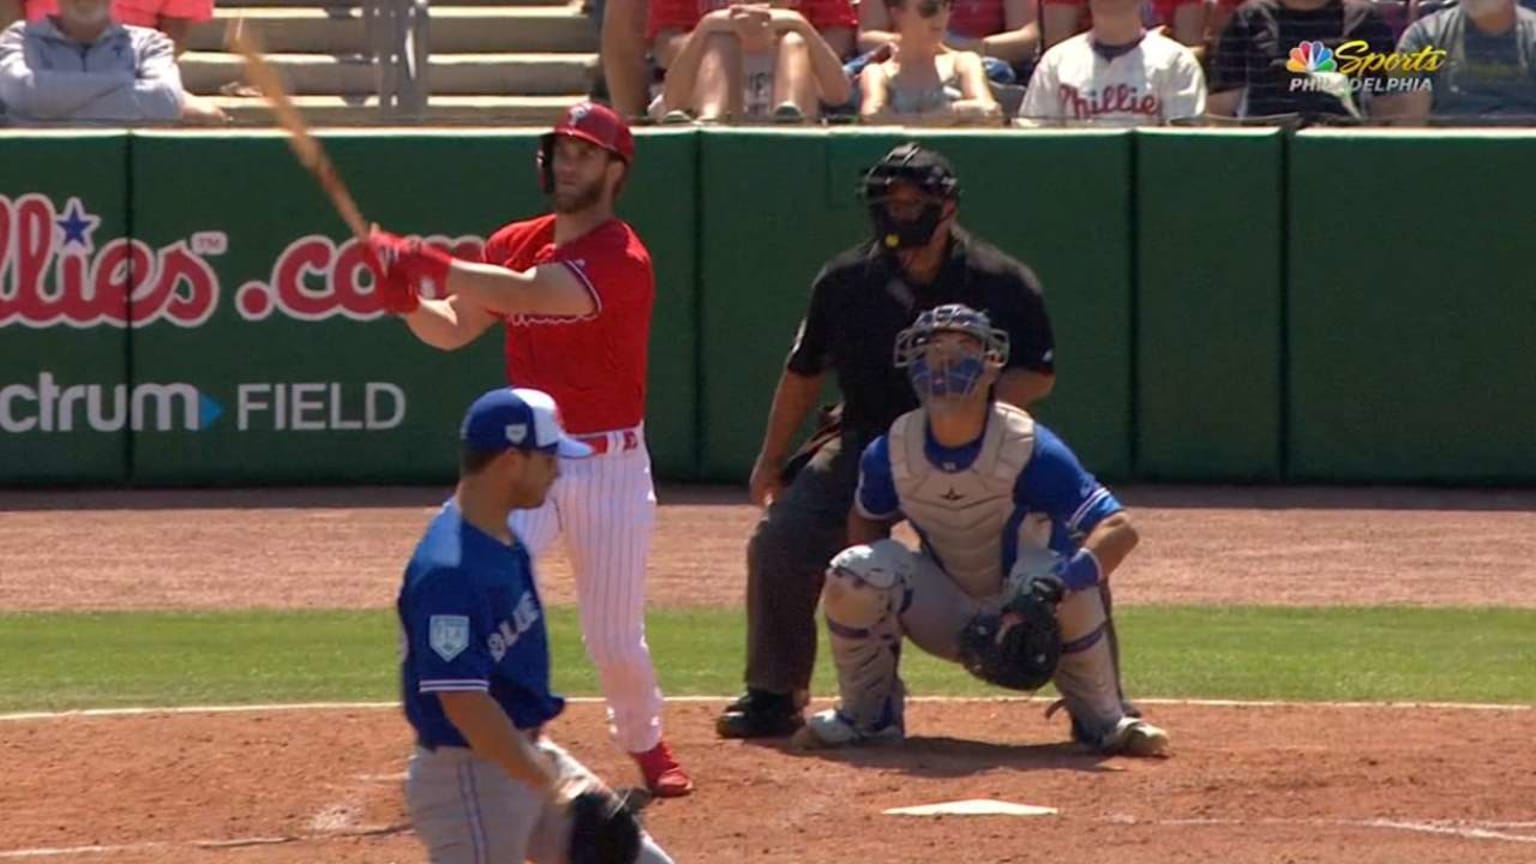 Bryce Harper says 'Aloha, Mr. Hand' with second homer